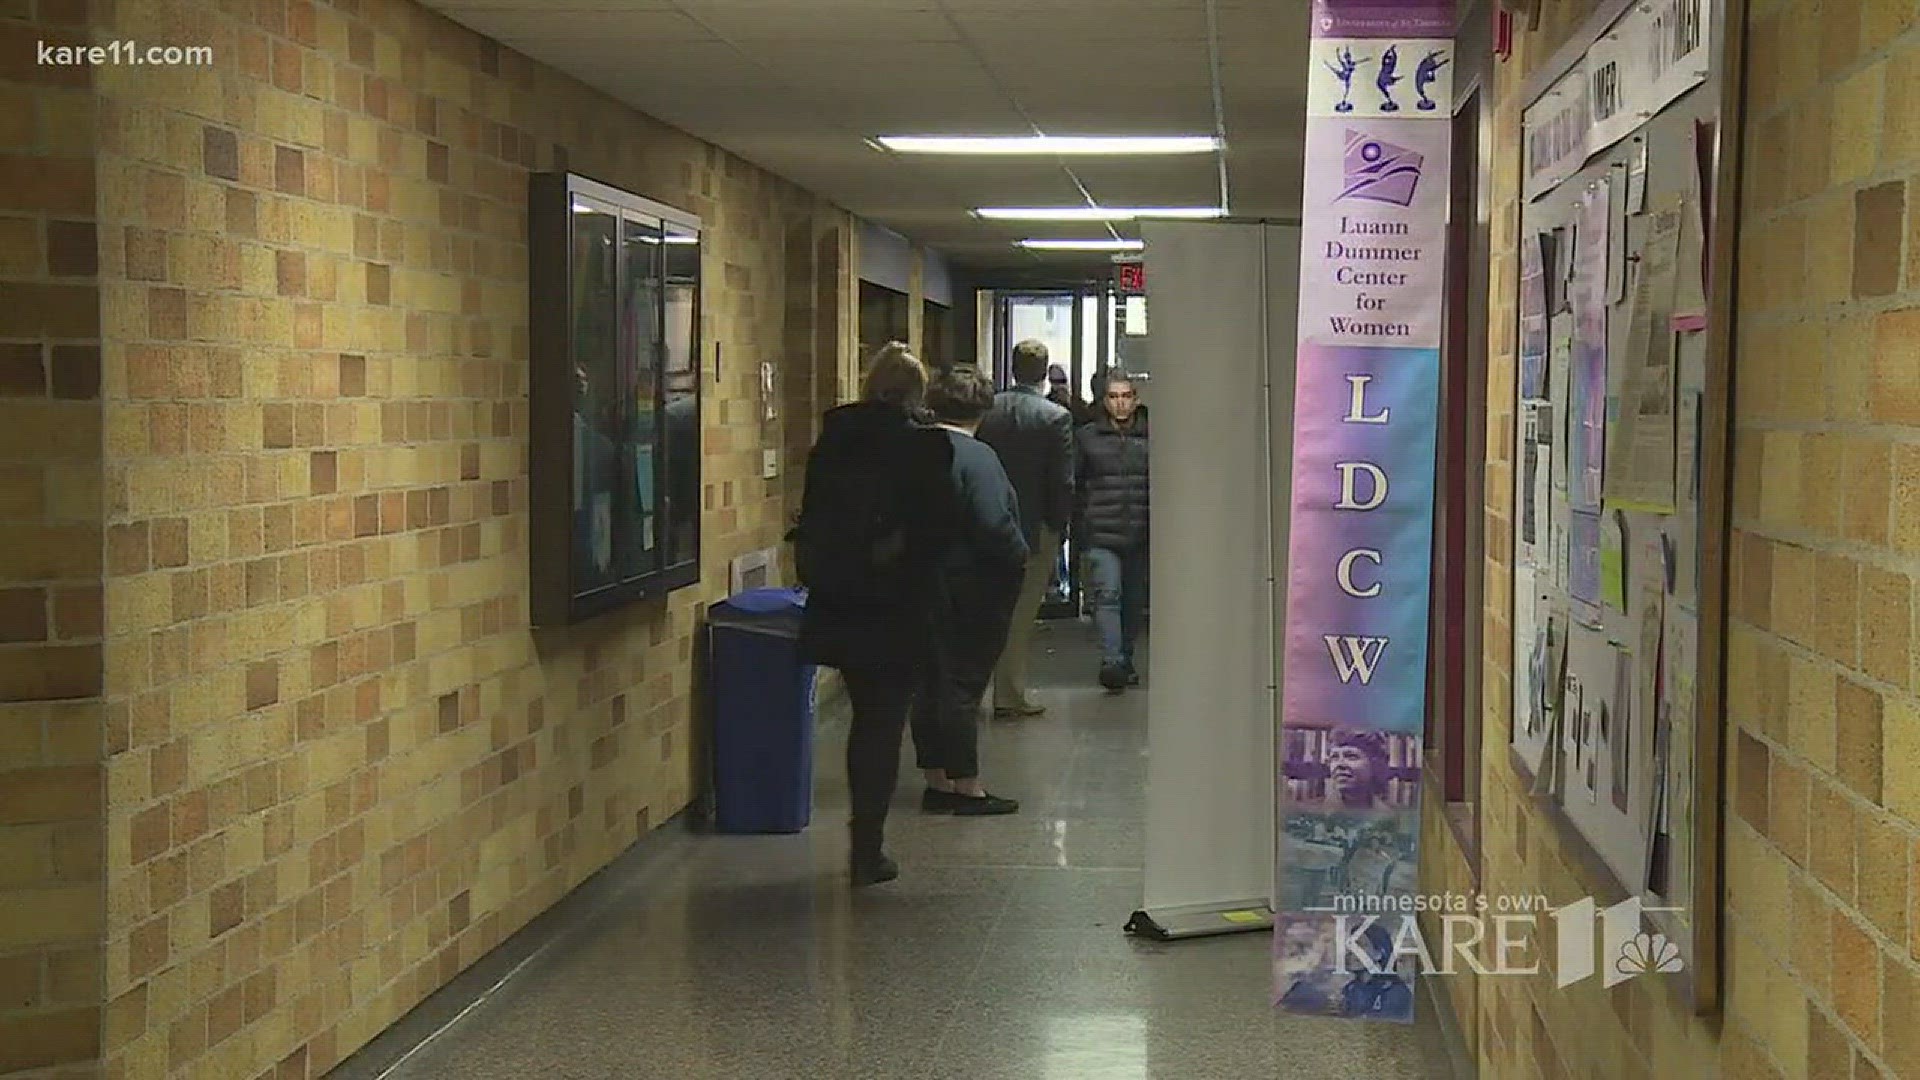 At the University of St. Thomas, flags of hope and peace hang outside. Today, however, there's one sign pointing to an auditorium where, inside, two different messages are being spoken. http://kare11.tv/2l2eIe1